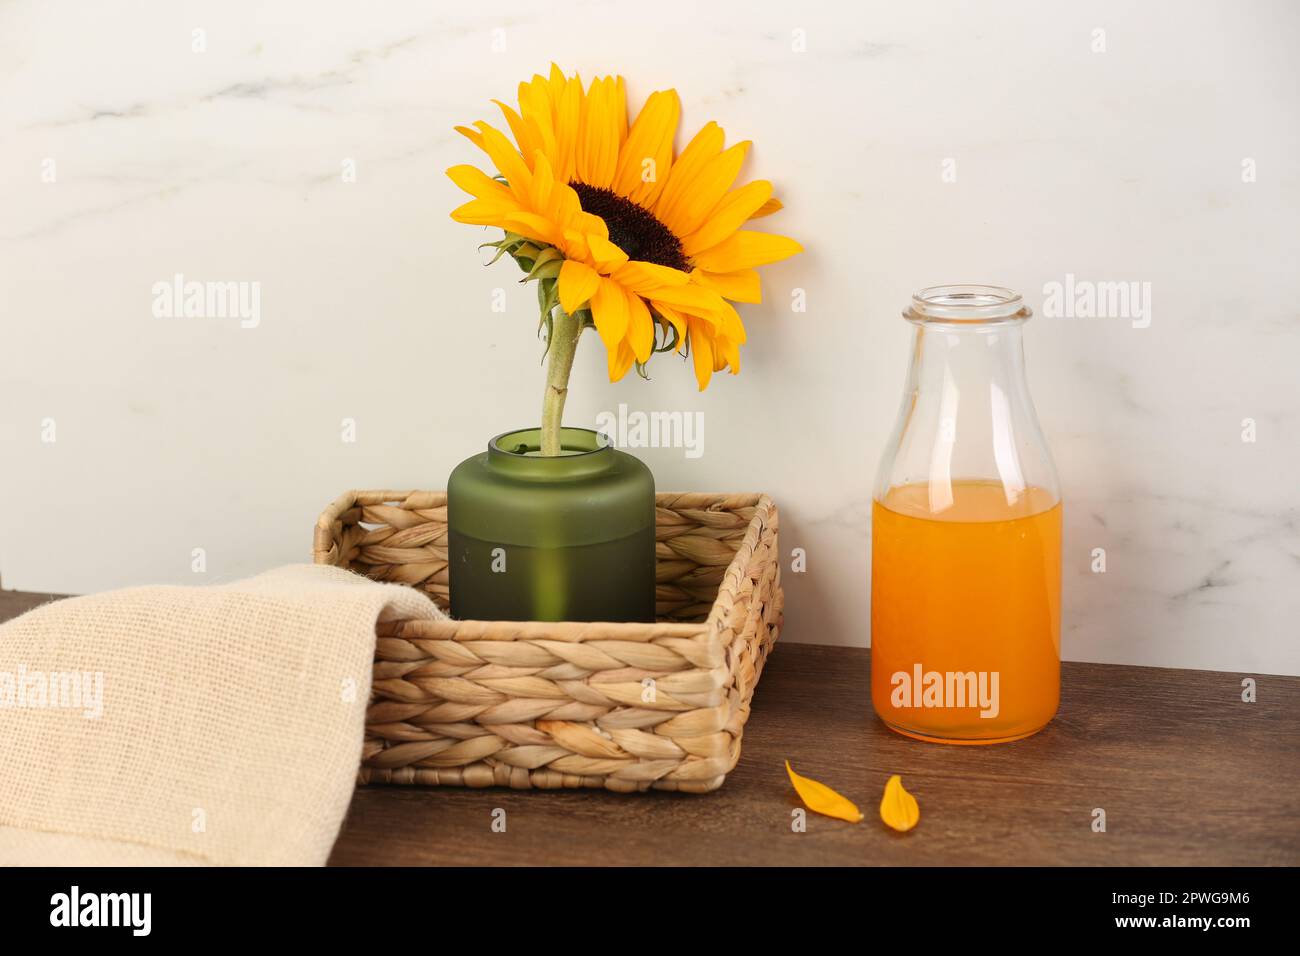 https://c8.alamy.com/comp/2PWG9M6/vase-with-beautiful-sunflower-in-wicker-basket-and-bottle-of-orange-juice-on-wooden-table-2PWG9M6.jpg